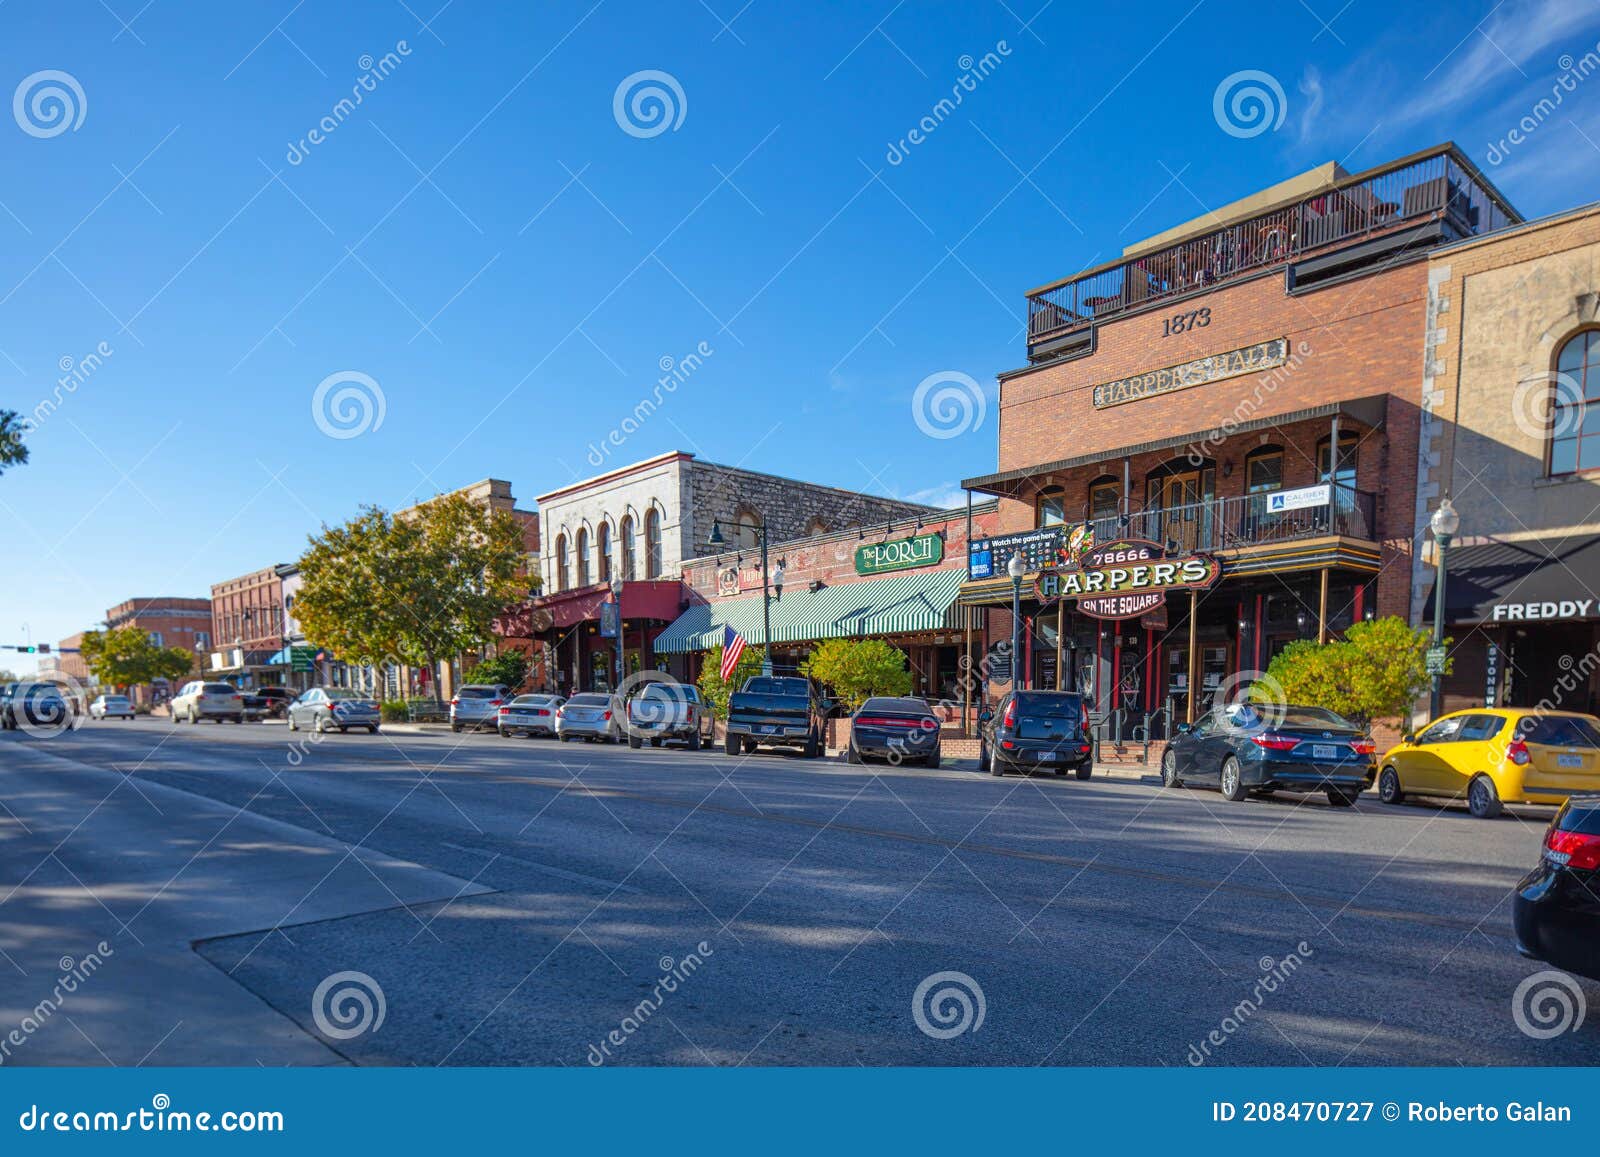 San Marcos Texas Photos - Free Royalty-free Stock Photos From Dreamstime